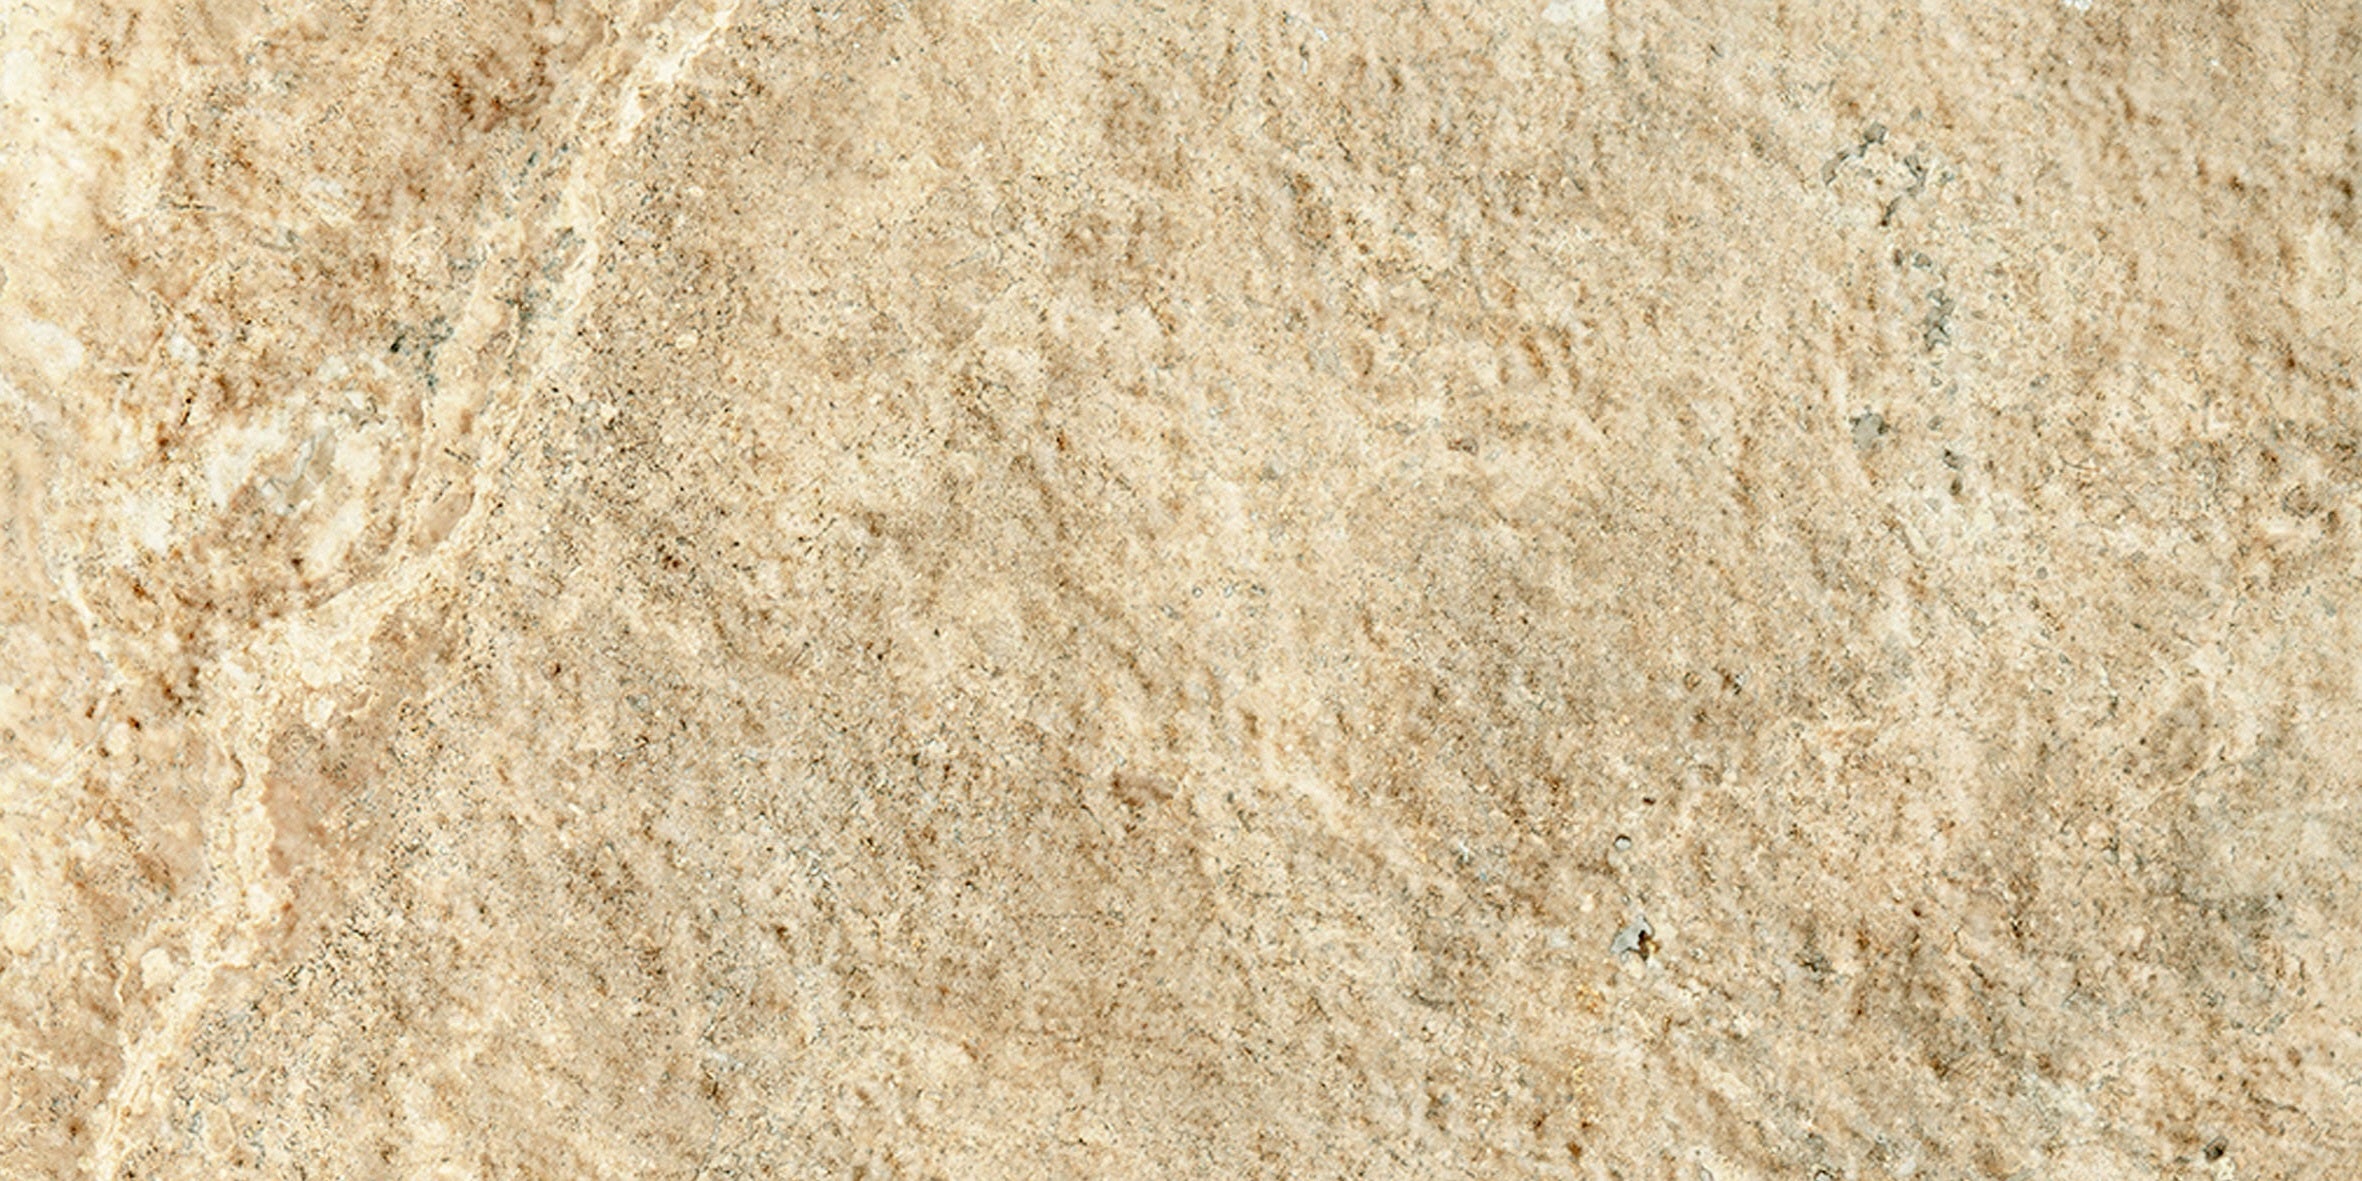 landmark frontier20 travertine cross cut cream paver tile 12x24x20mm matte rectified porcelain tile distributed by surface group international